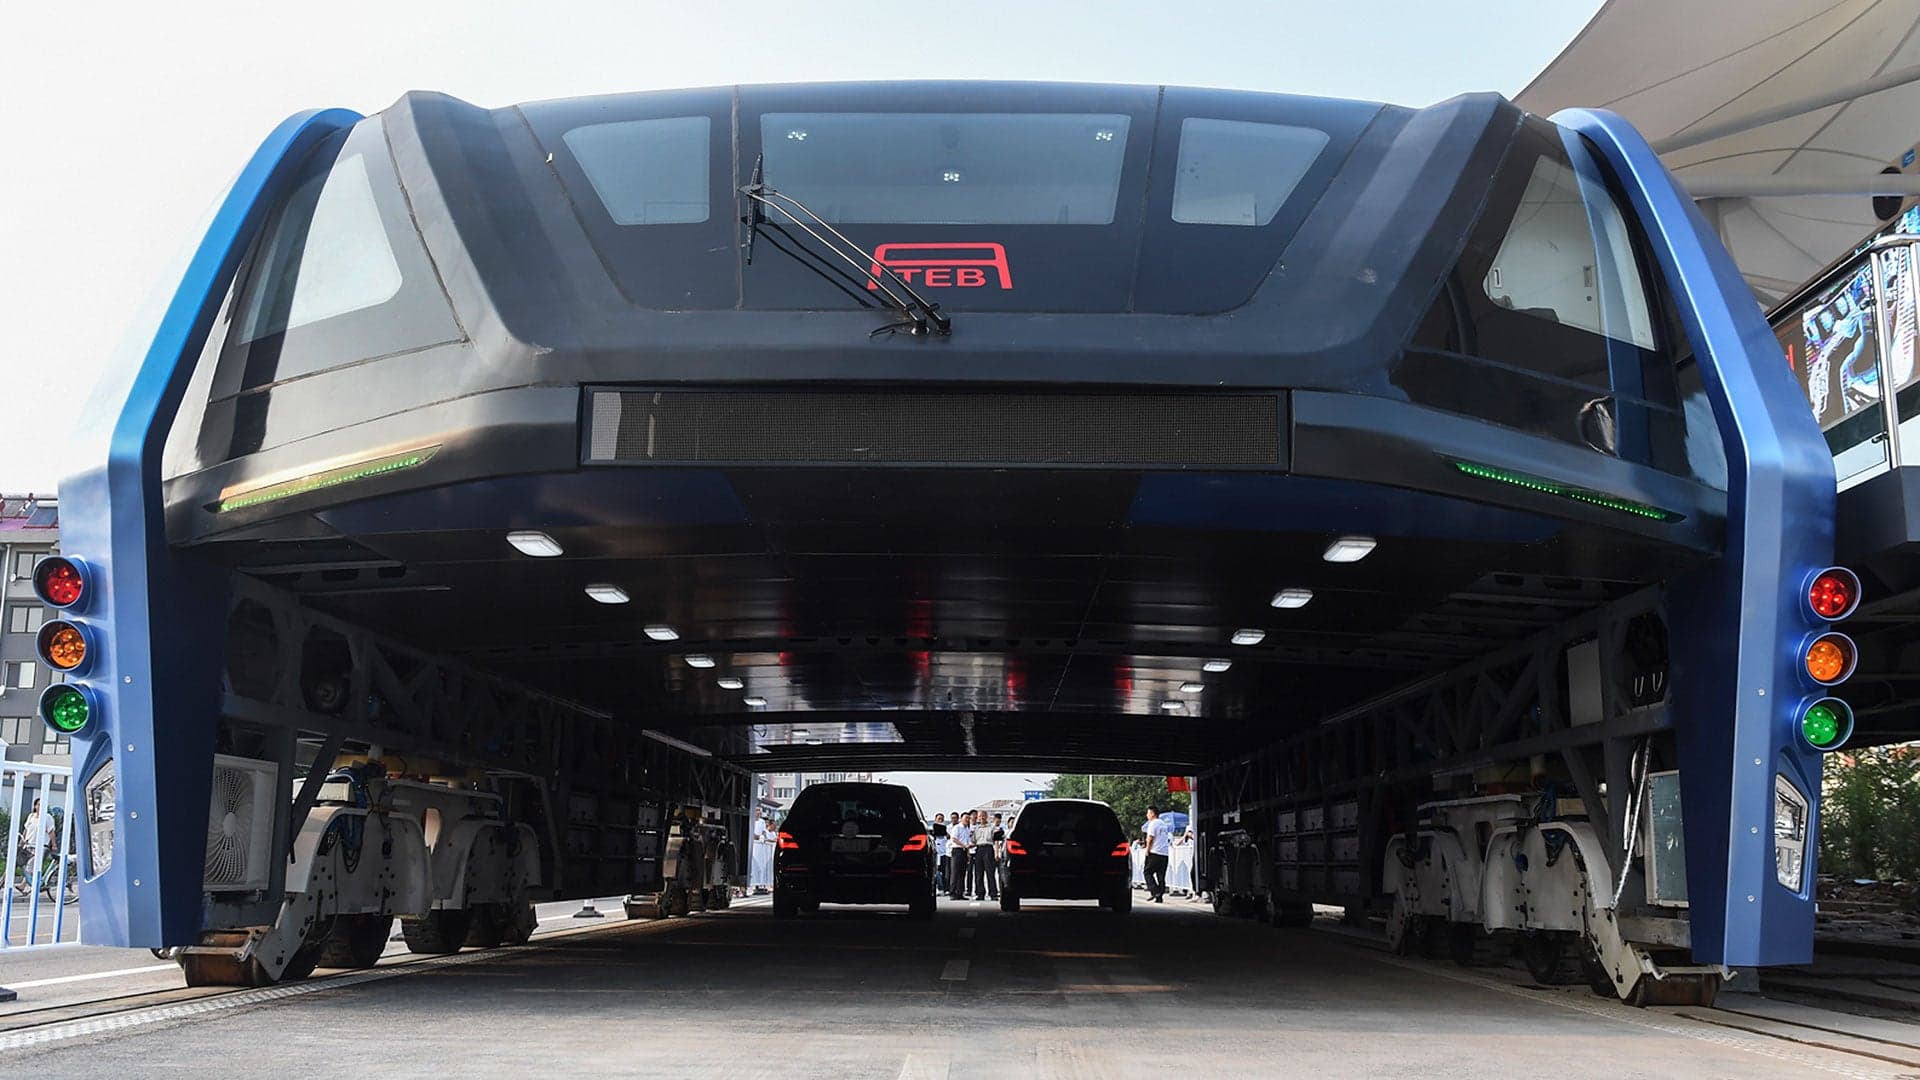 China’s Road-Straddling Super-Bus Is Up and Running